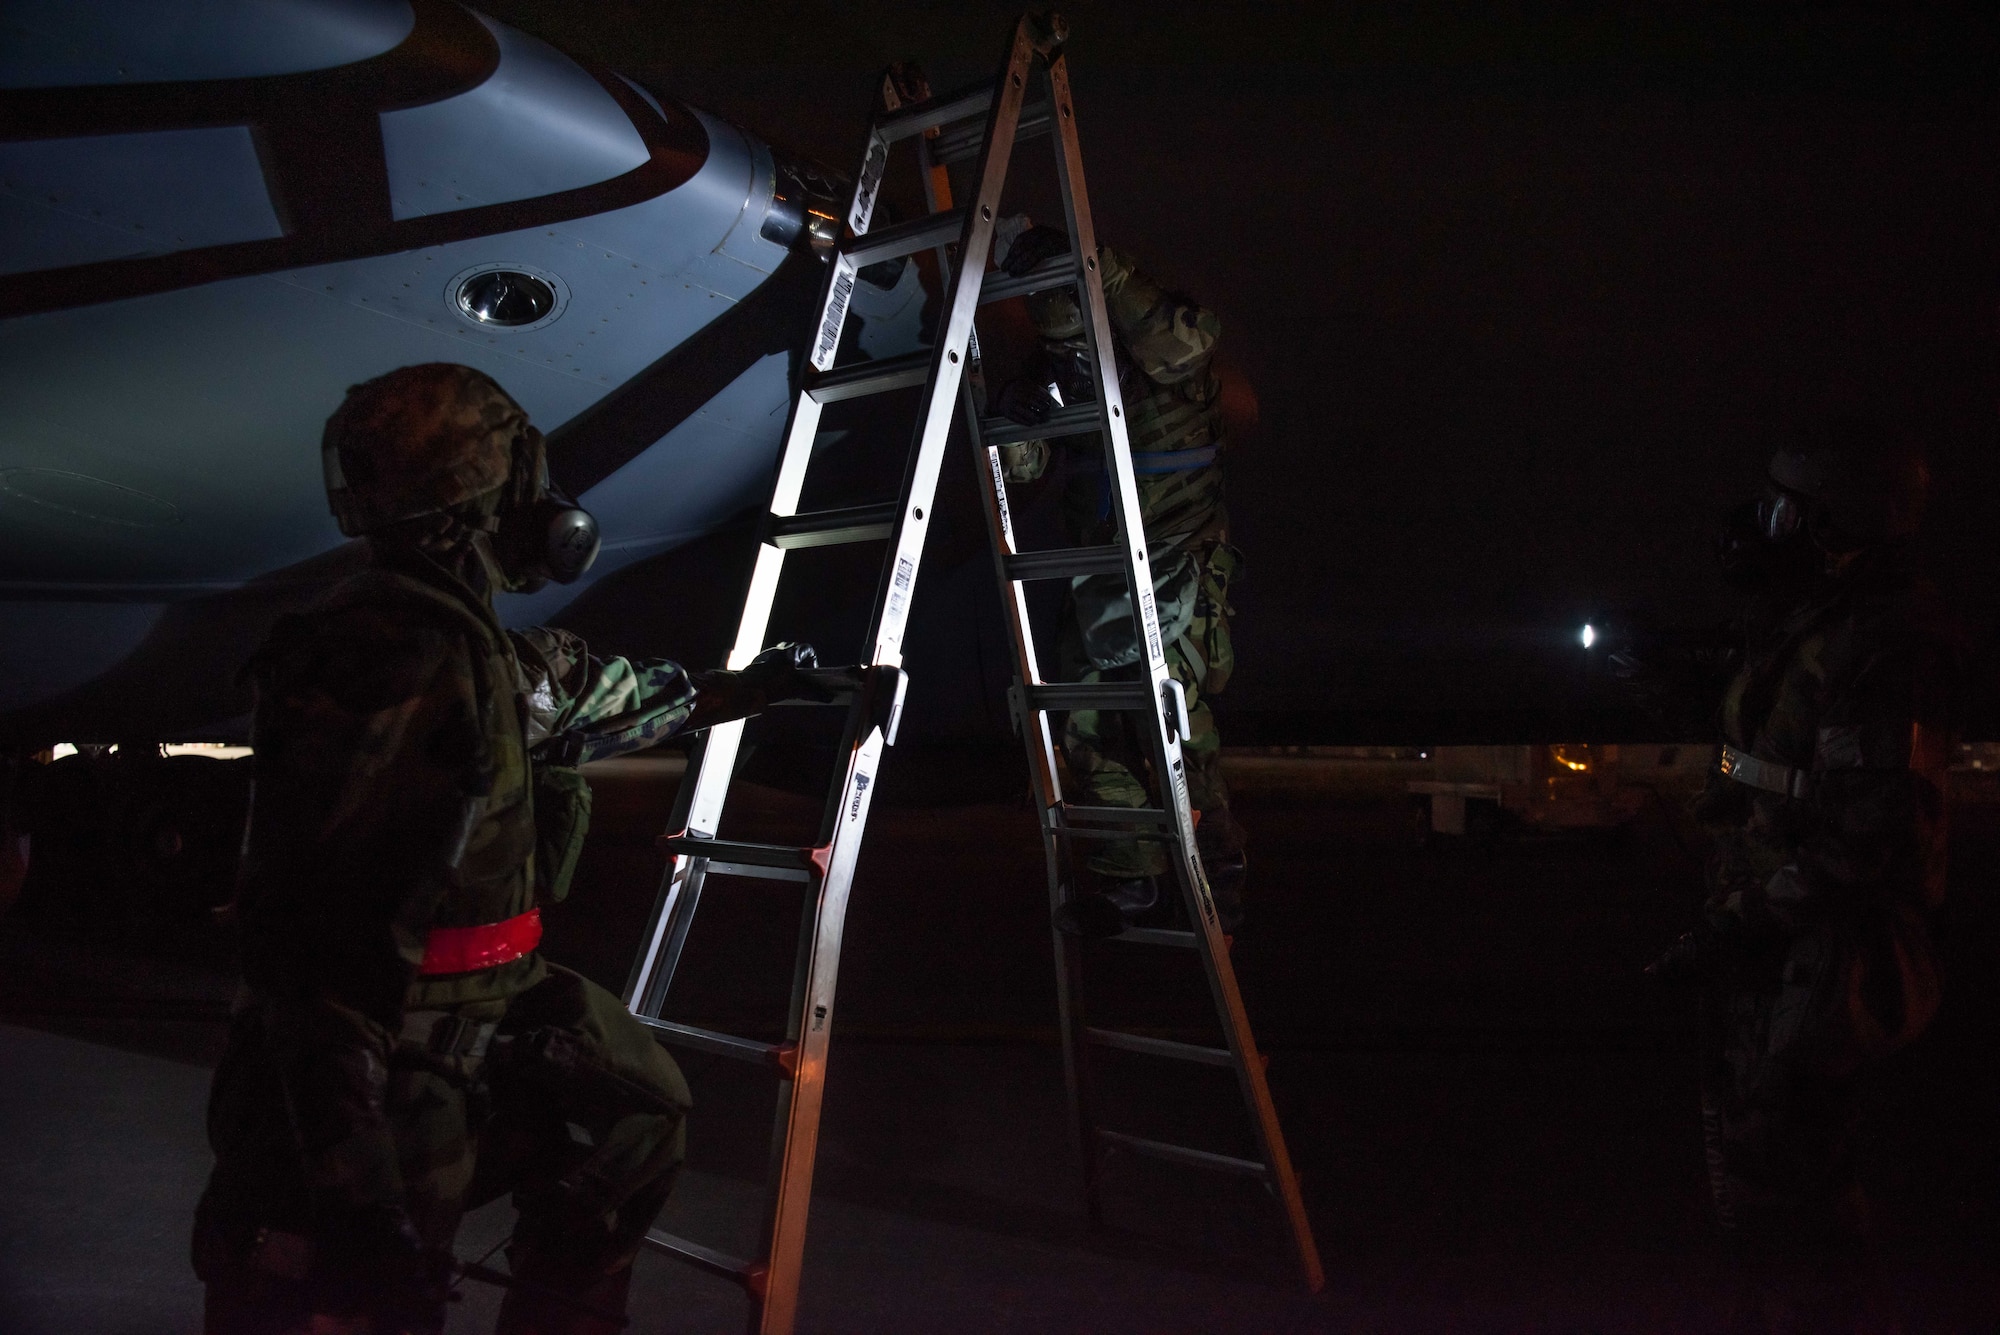 Airmen in protective gear work together to use a ladder to inspect the wing of a KC-135 Stratotanker.